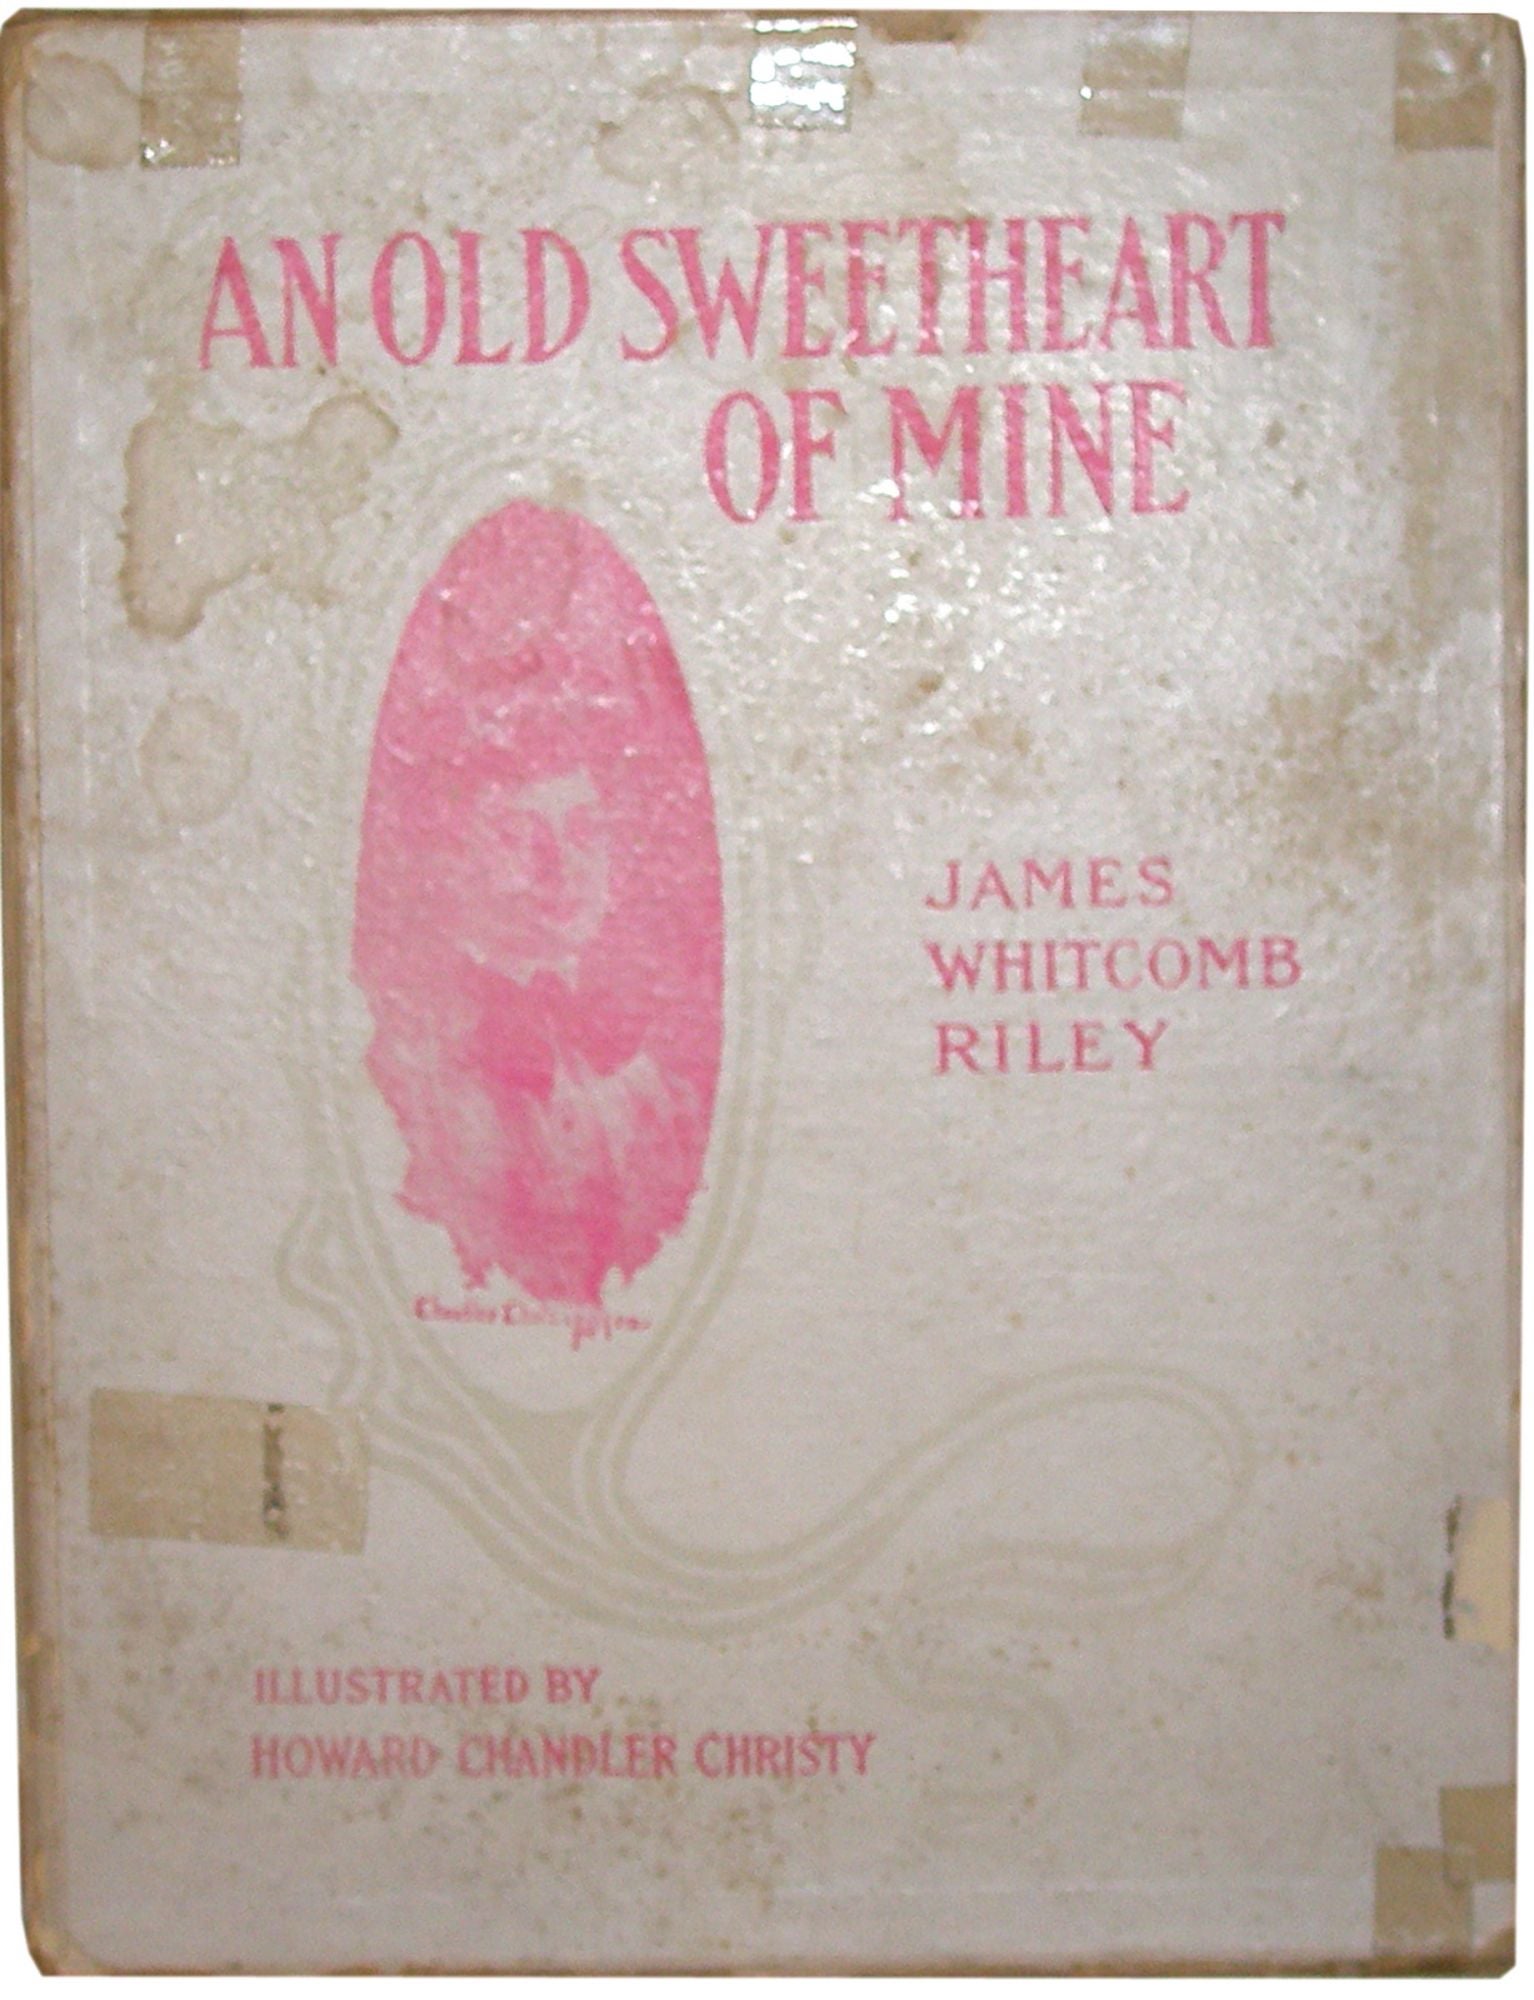 An Old Sweetheart of Mine by James Whitcomb Riley on B & B Rare Books, Ltd